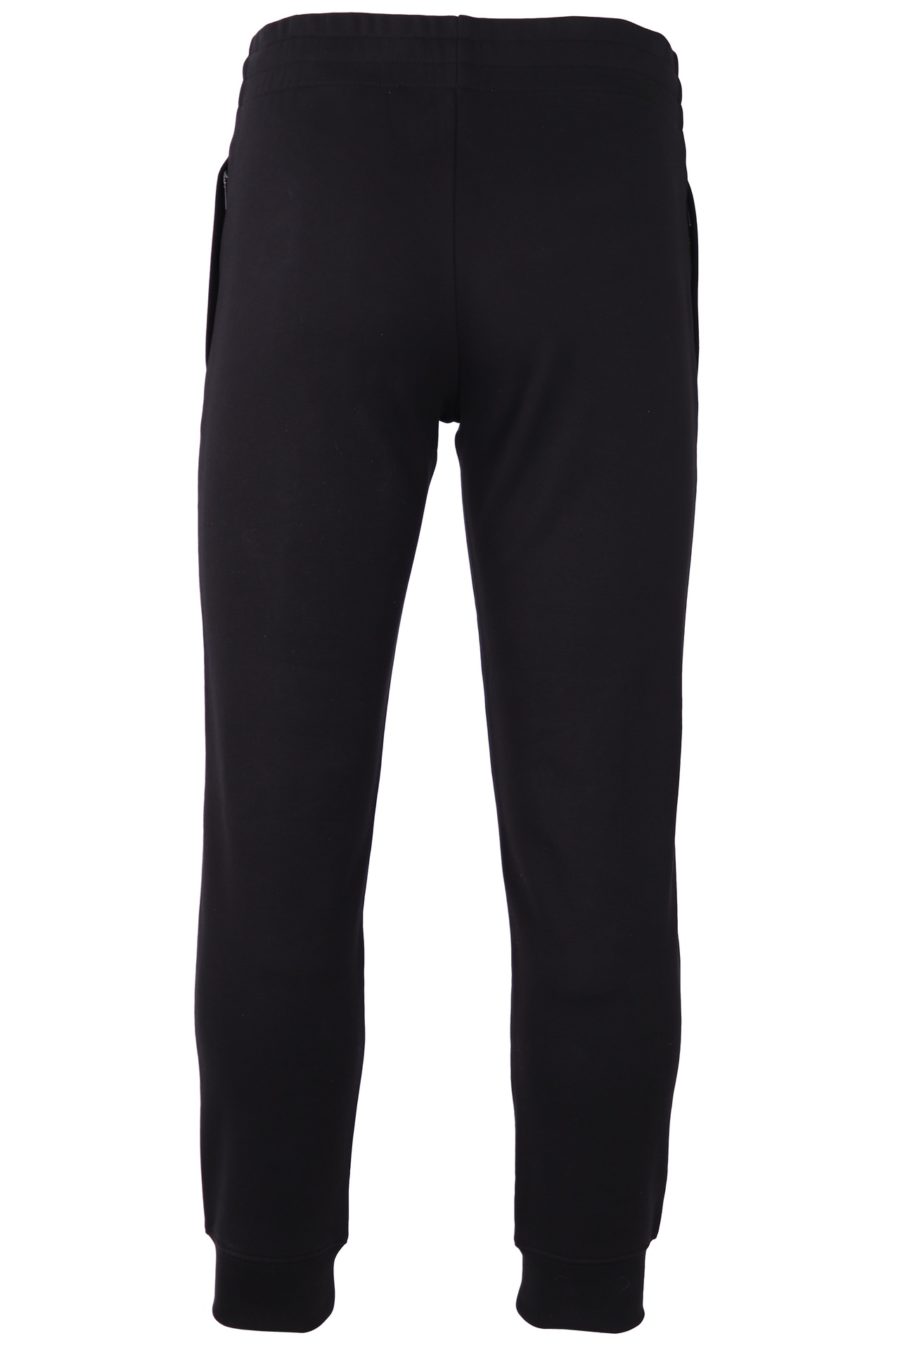 Tracksuit bottoms Moschino black with white logo - 72ce134705ed84e21896dd012b181dc99d0d3496